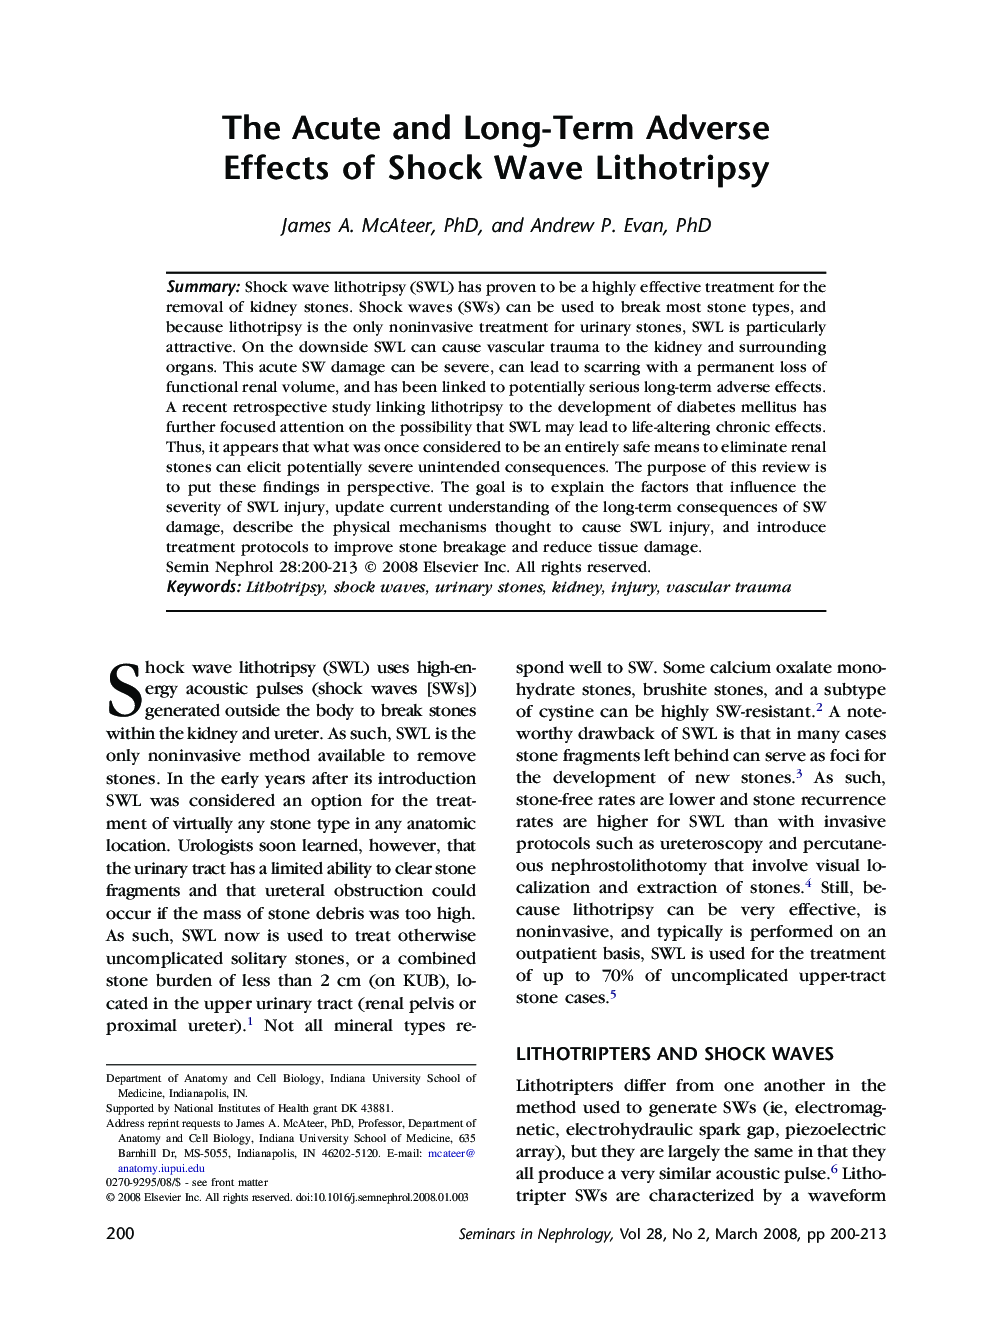 The Acute and Long-Term Adverse Effects of Shock Wave Lithotripsy 